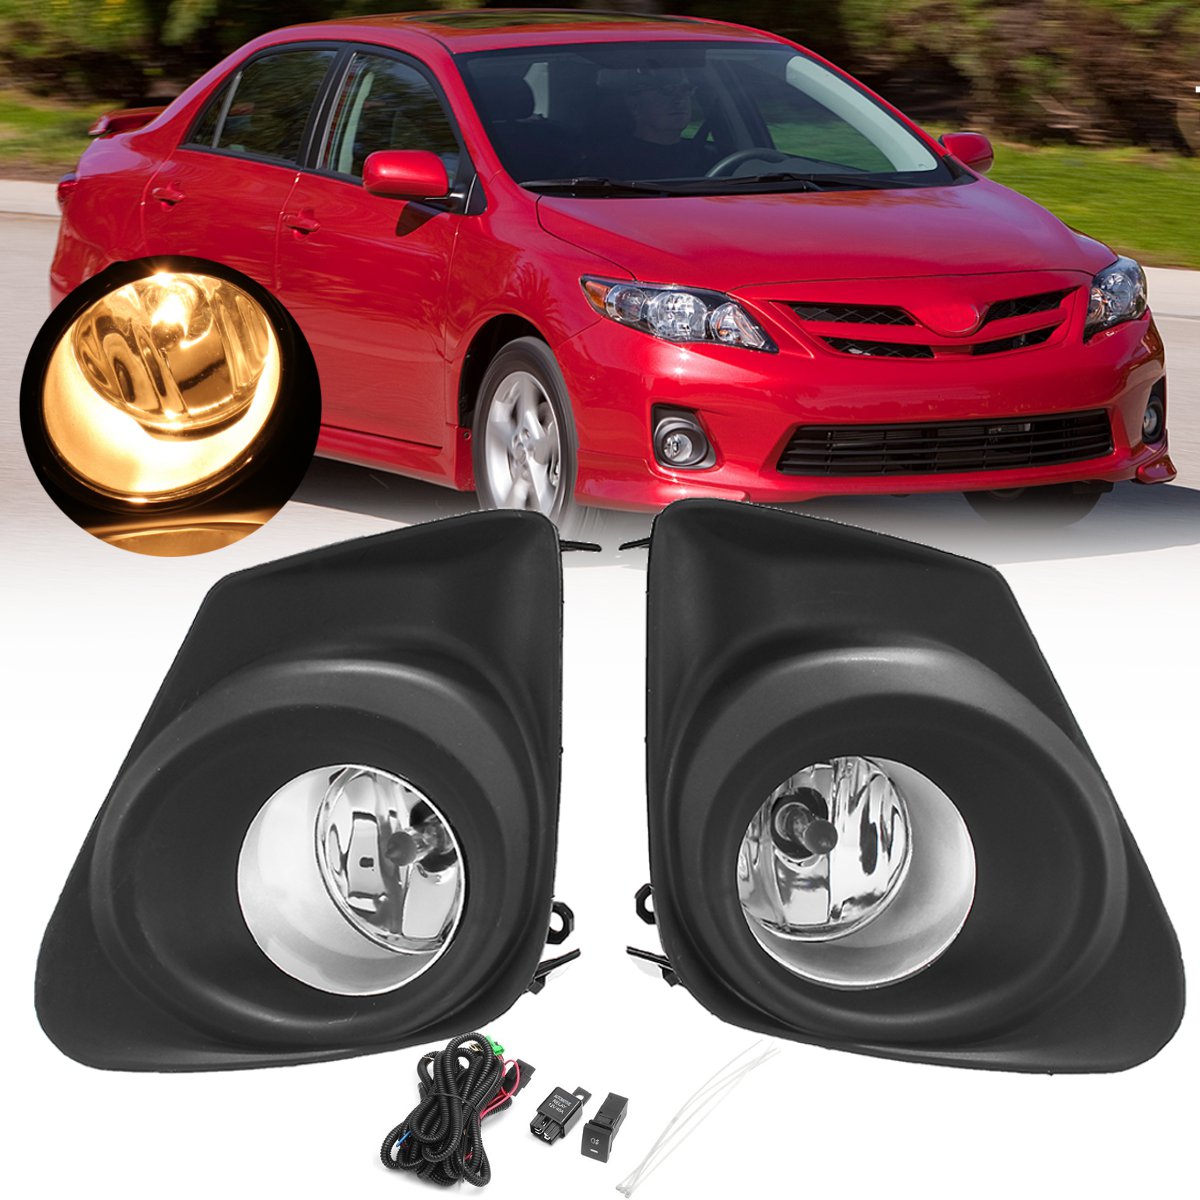 Firebrick Car Front Bumper Fog Lights Lamp with H11 Bulb Switch Kit Pair for Toyota Corolla 11-13